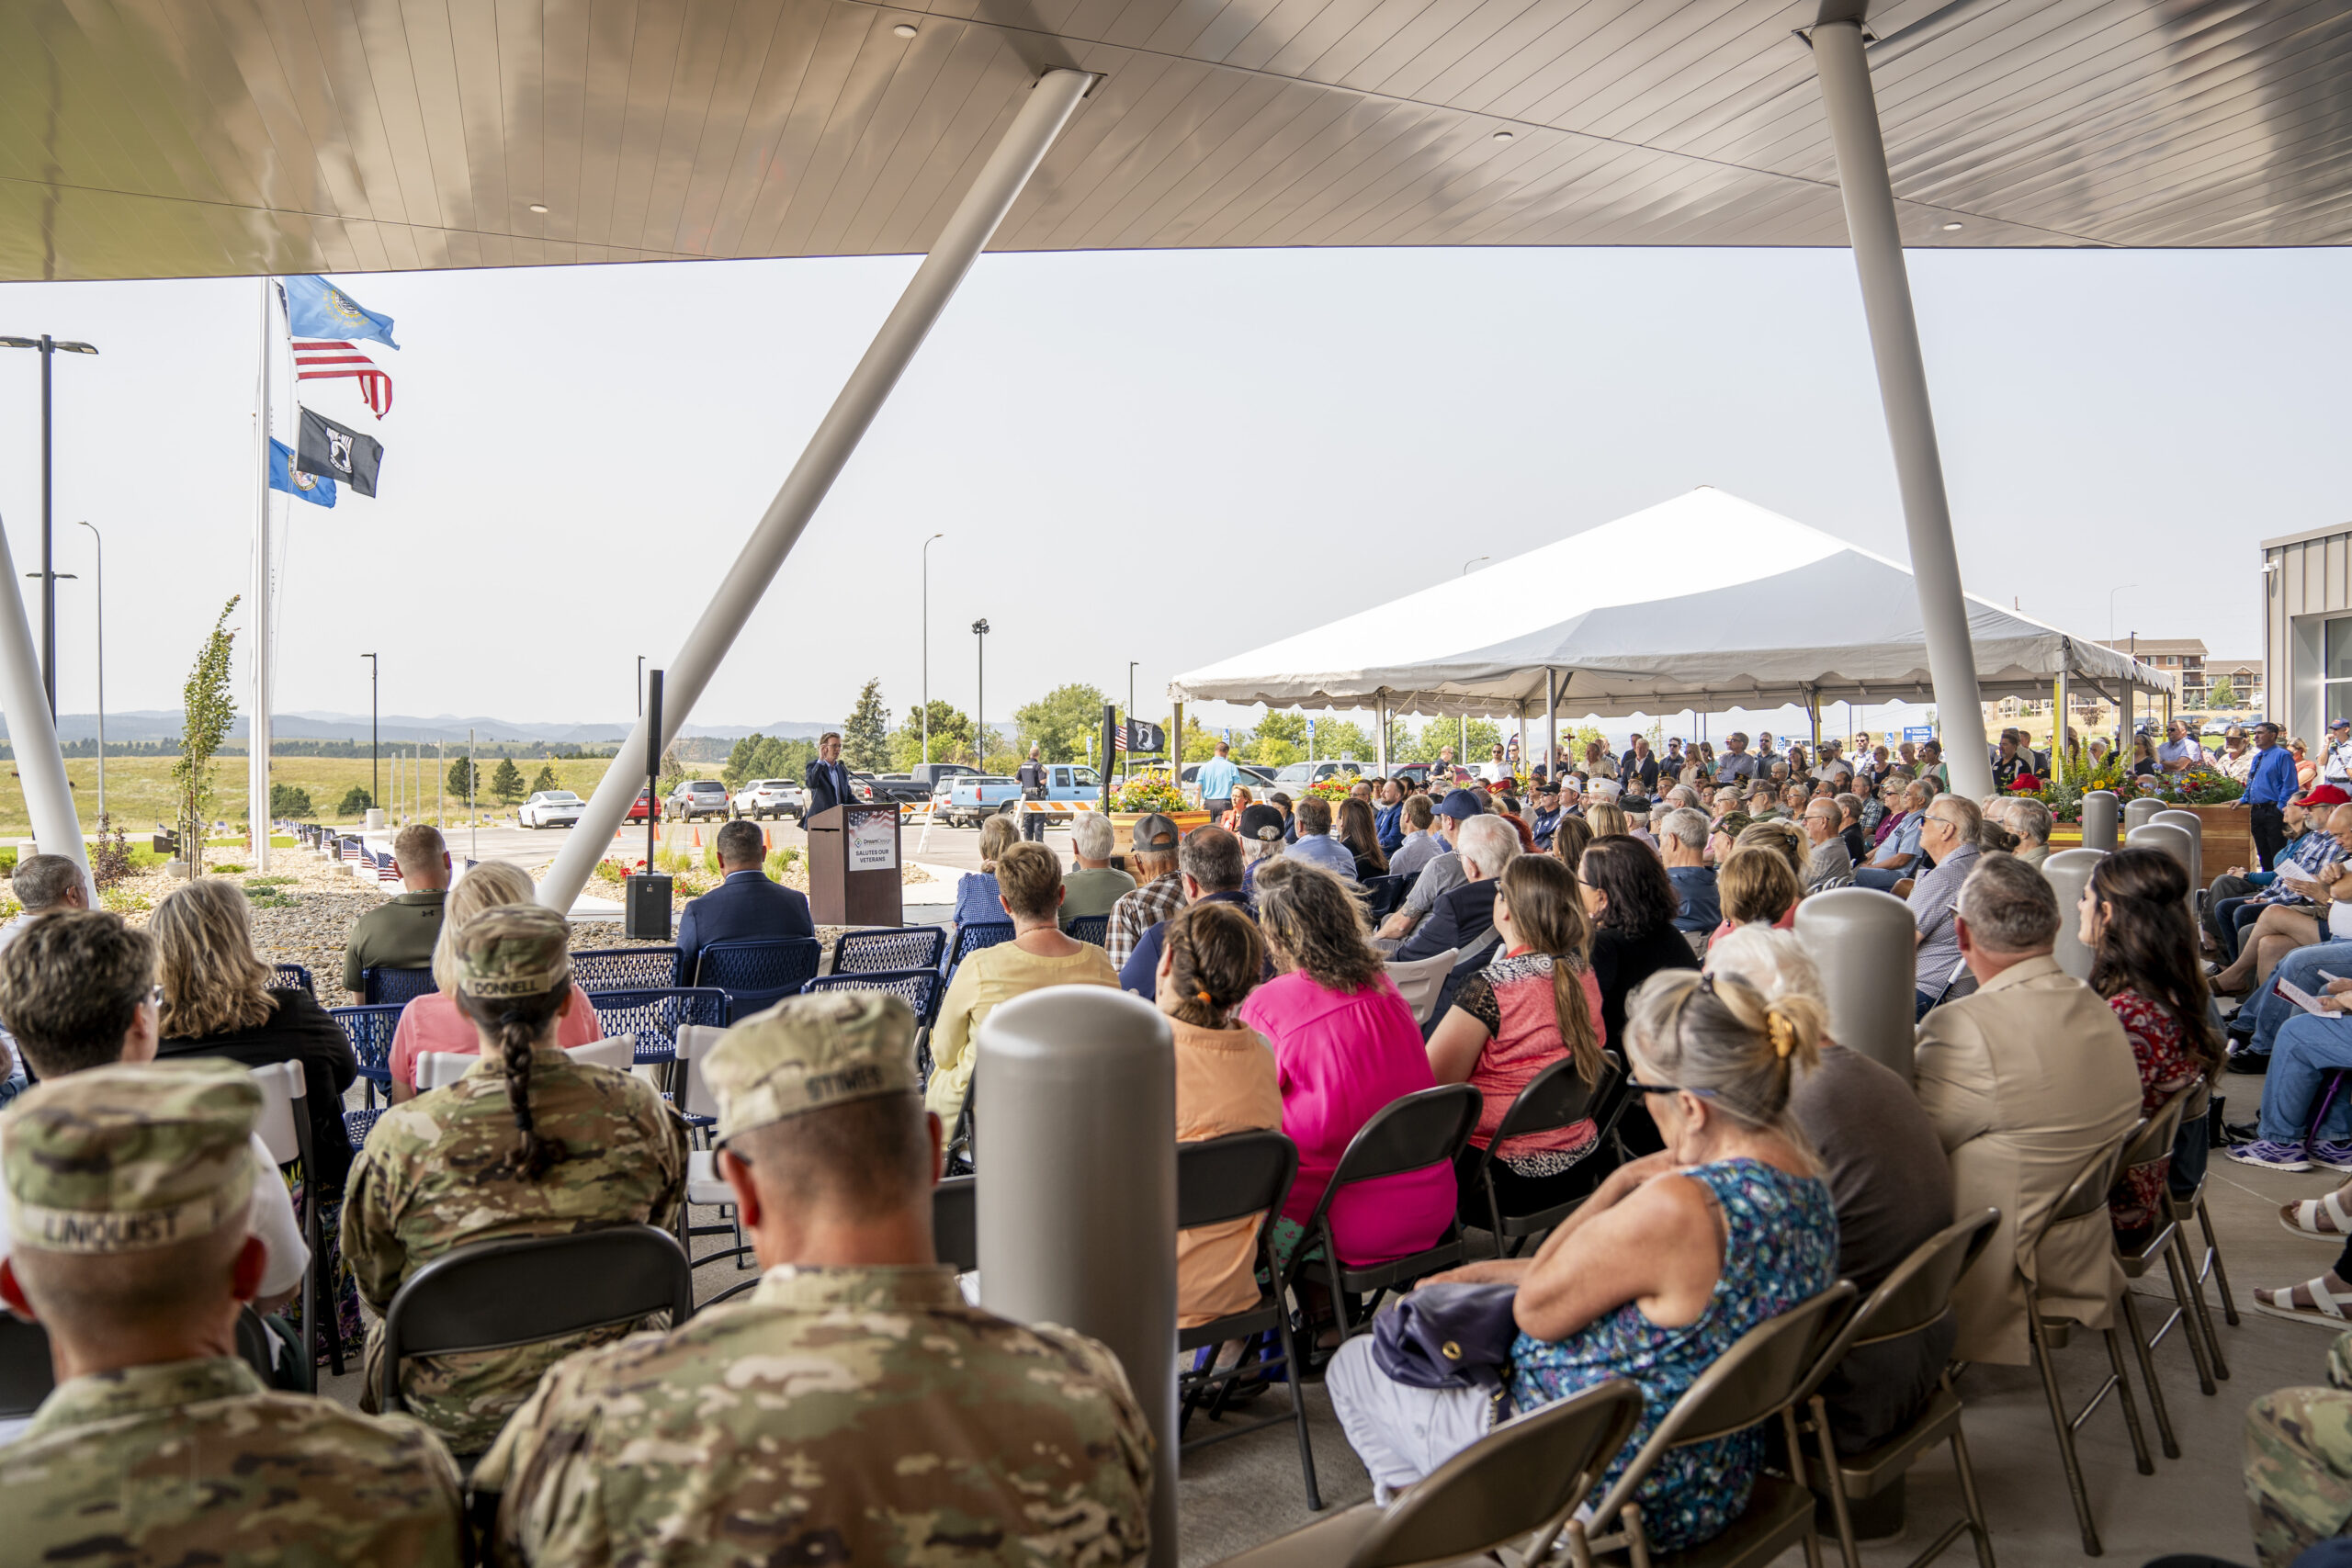 Over 400 in attendance at the VA Clinic ribbon cutting ceremony in Rapid City South Dakota